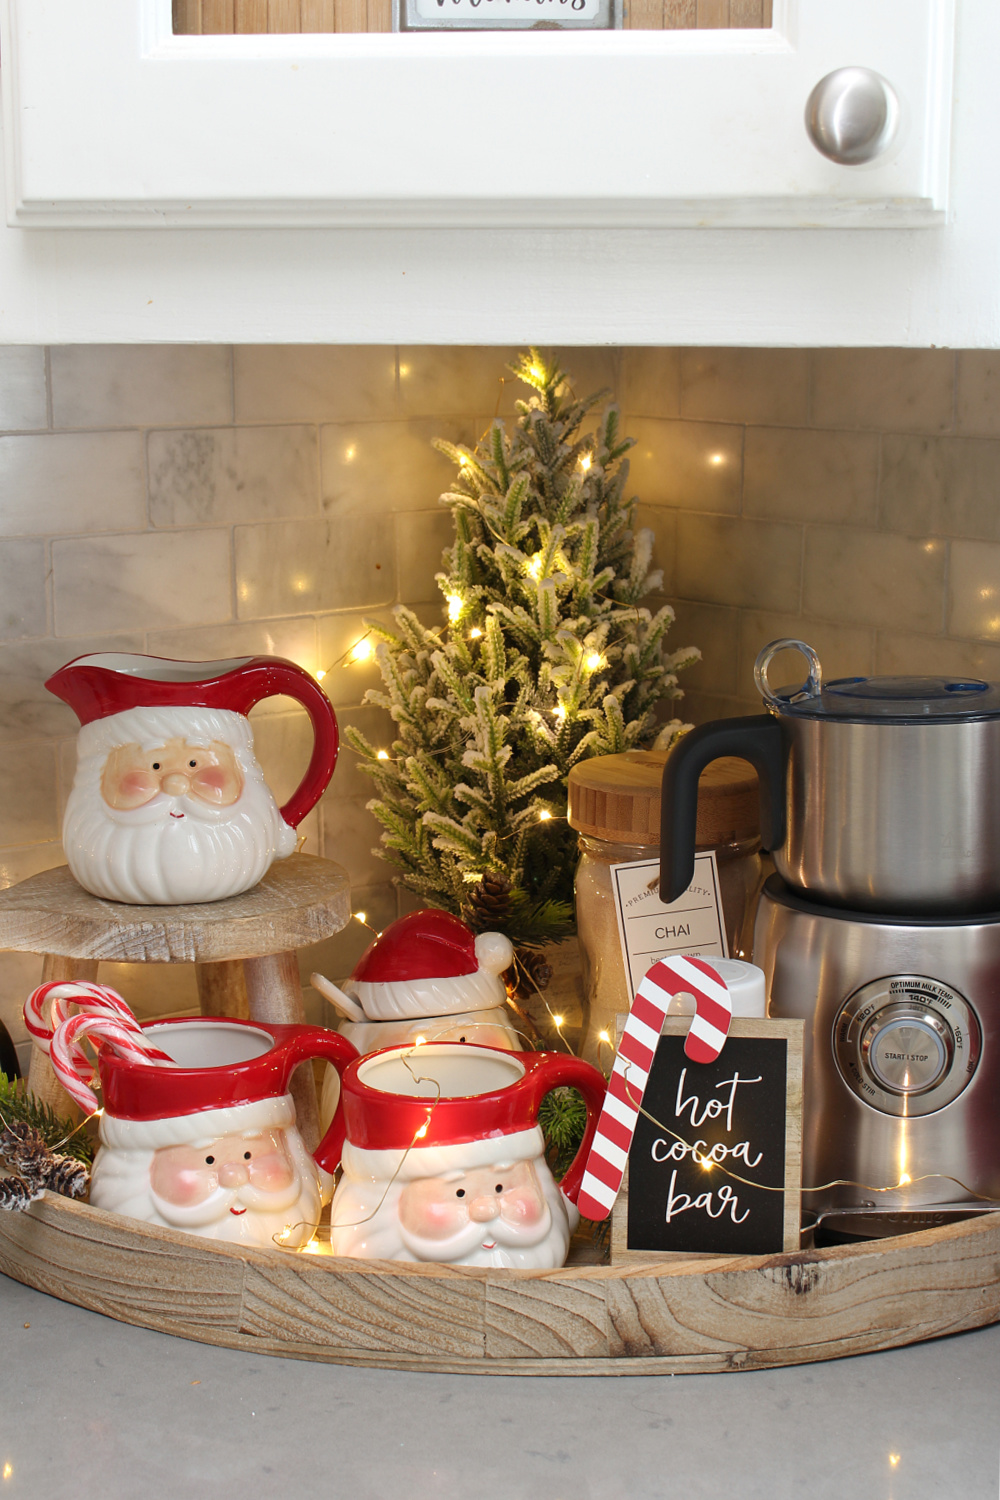 https://www.cleanandscentsible.com/wp-content/uploads/2021/12/red-and-white-Christmas-kitchen-22-Clean-and-Scentsible.jpg